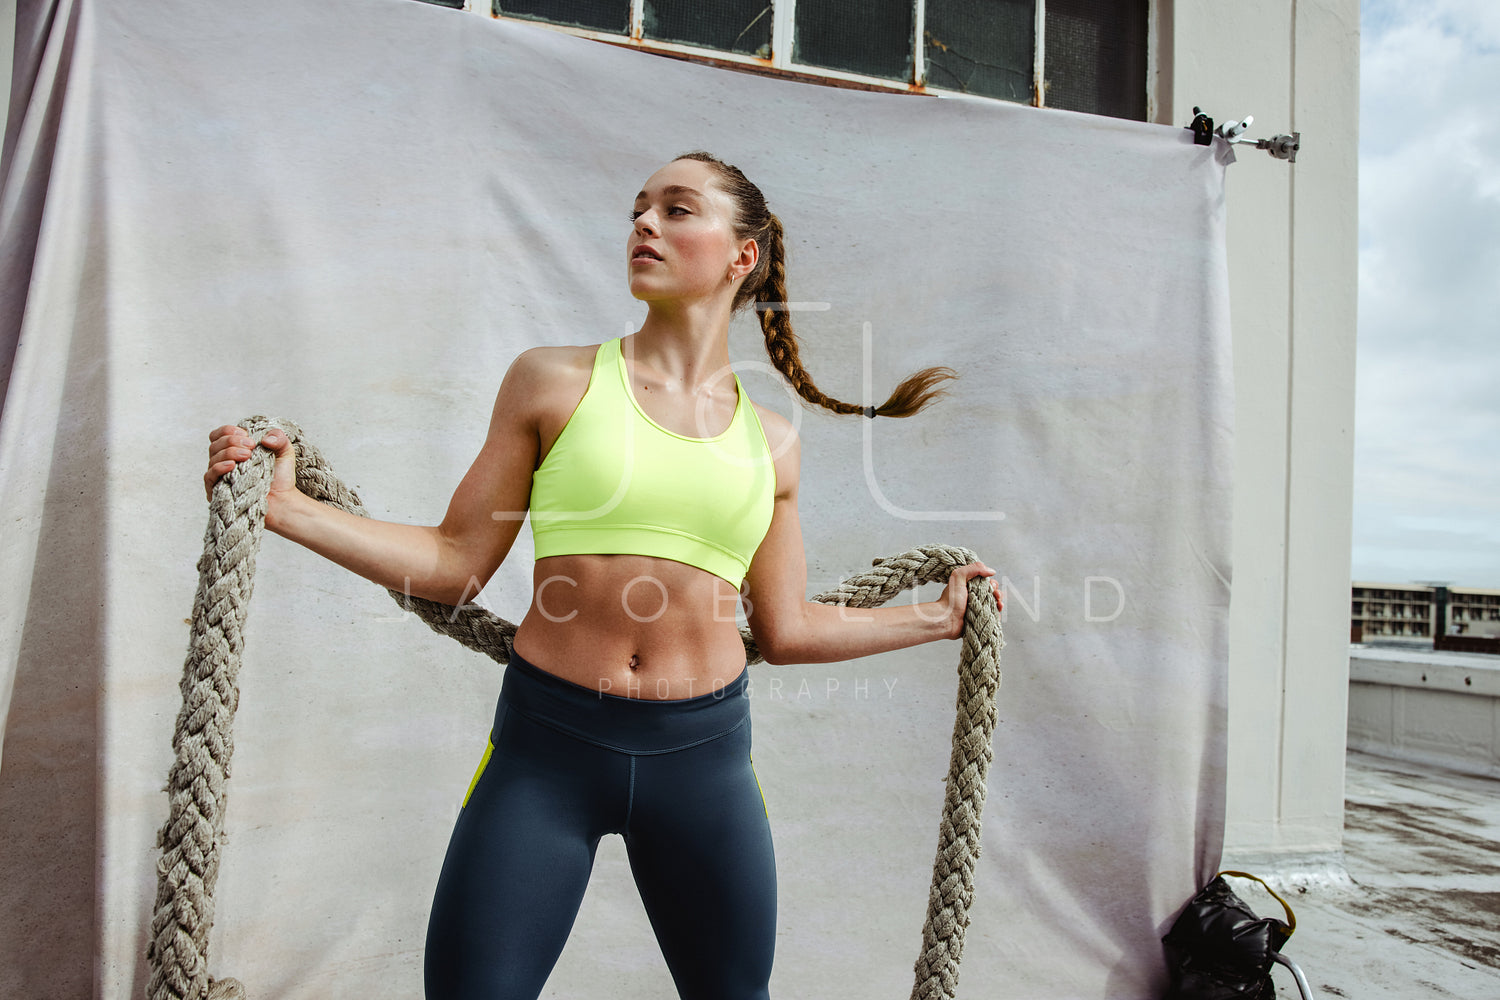 Fitness woman exercising with battle rope – Jacob Lund Photography Store-  premium stock photo